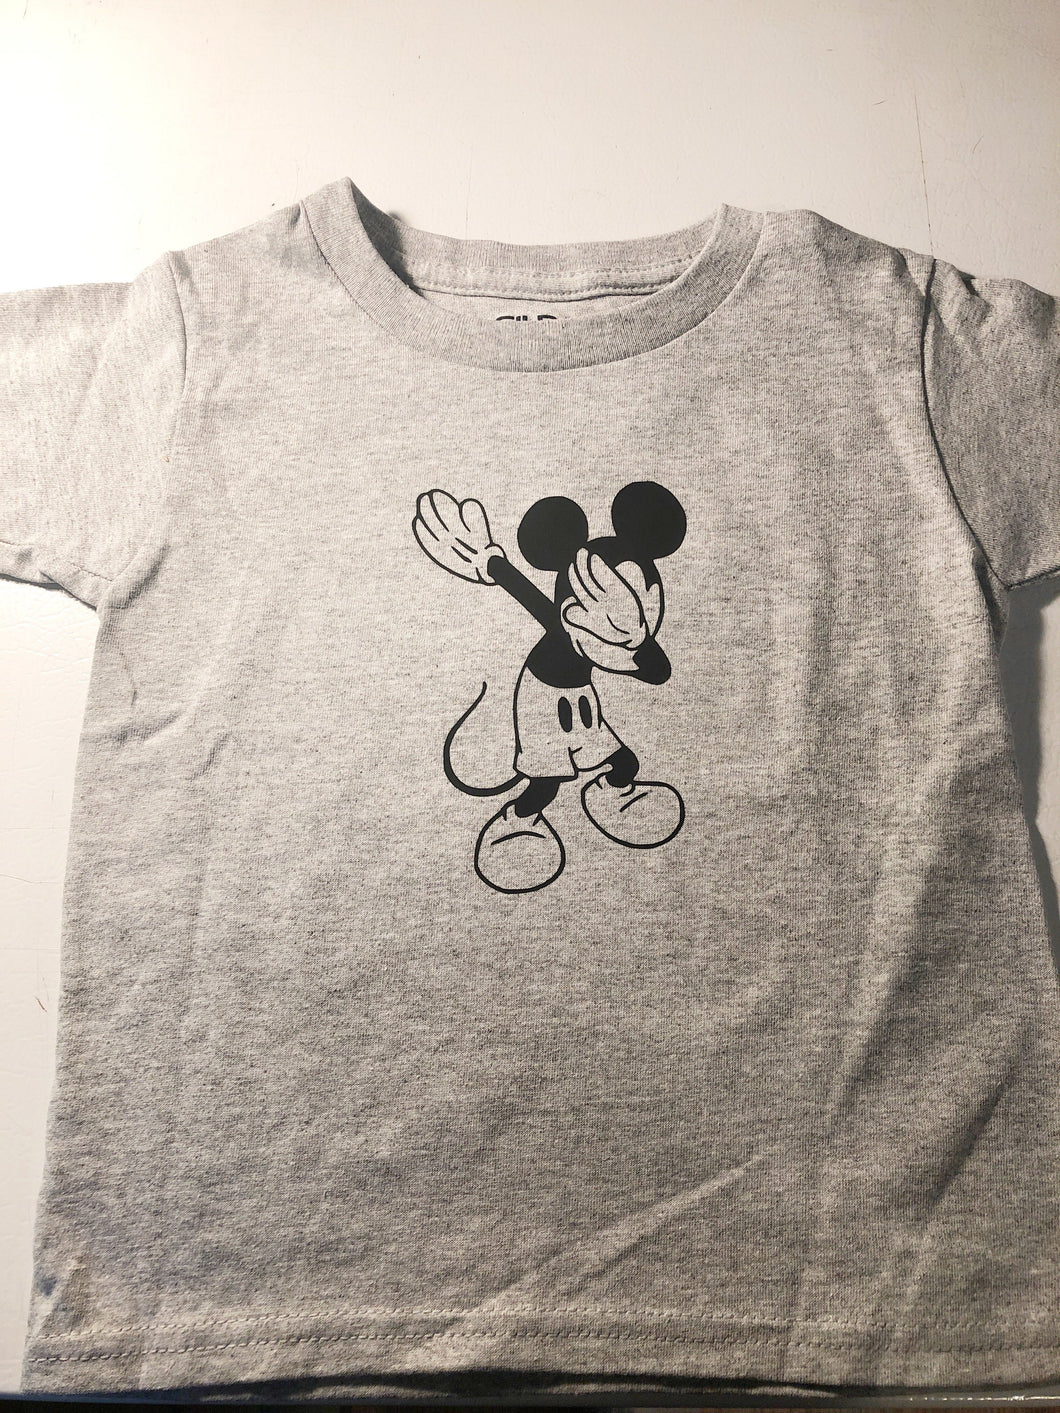 Toddler T-Shirt - Mickey Mouse Dabbing - Uniquely Custom Gifts and Designs